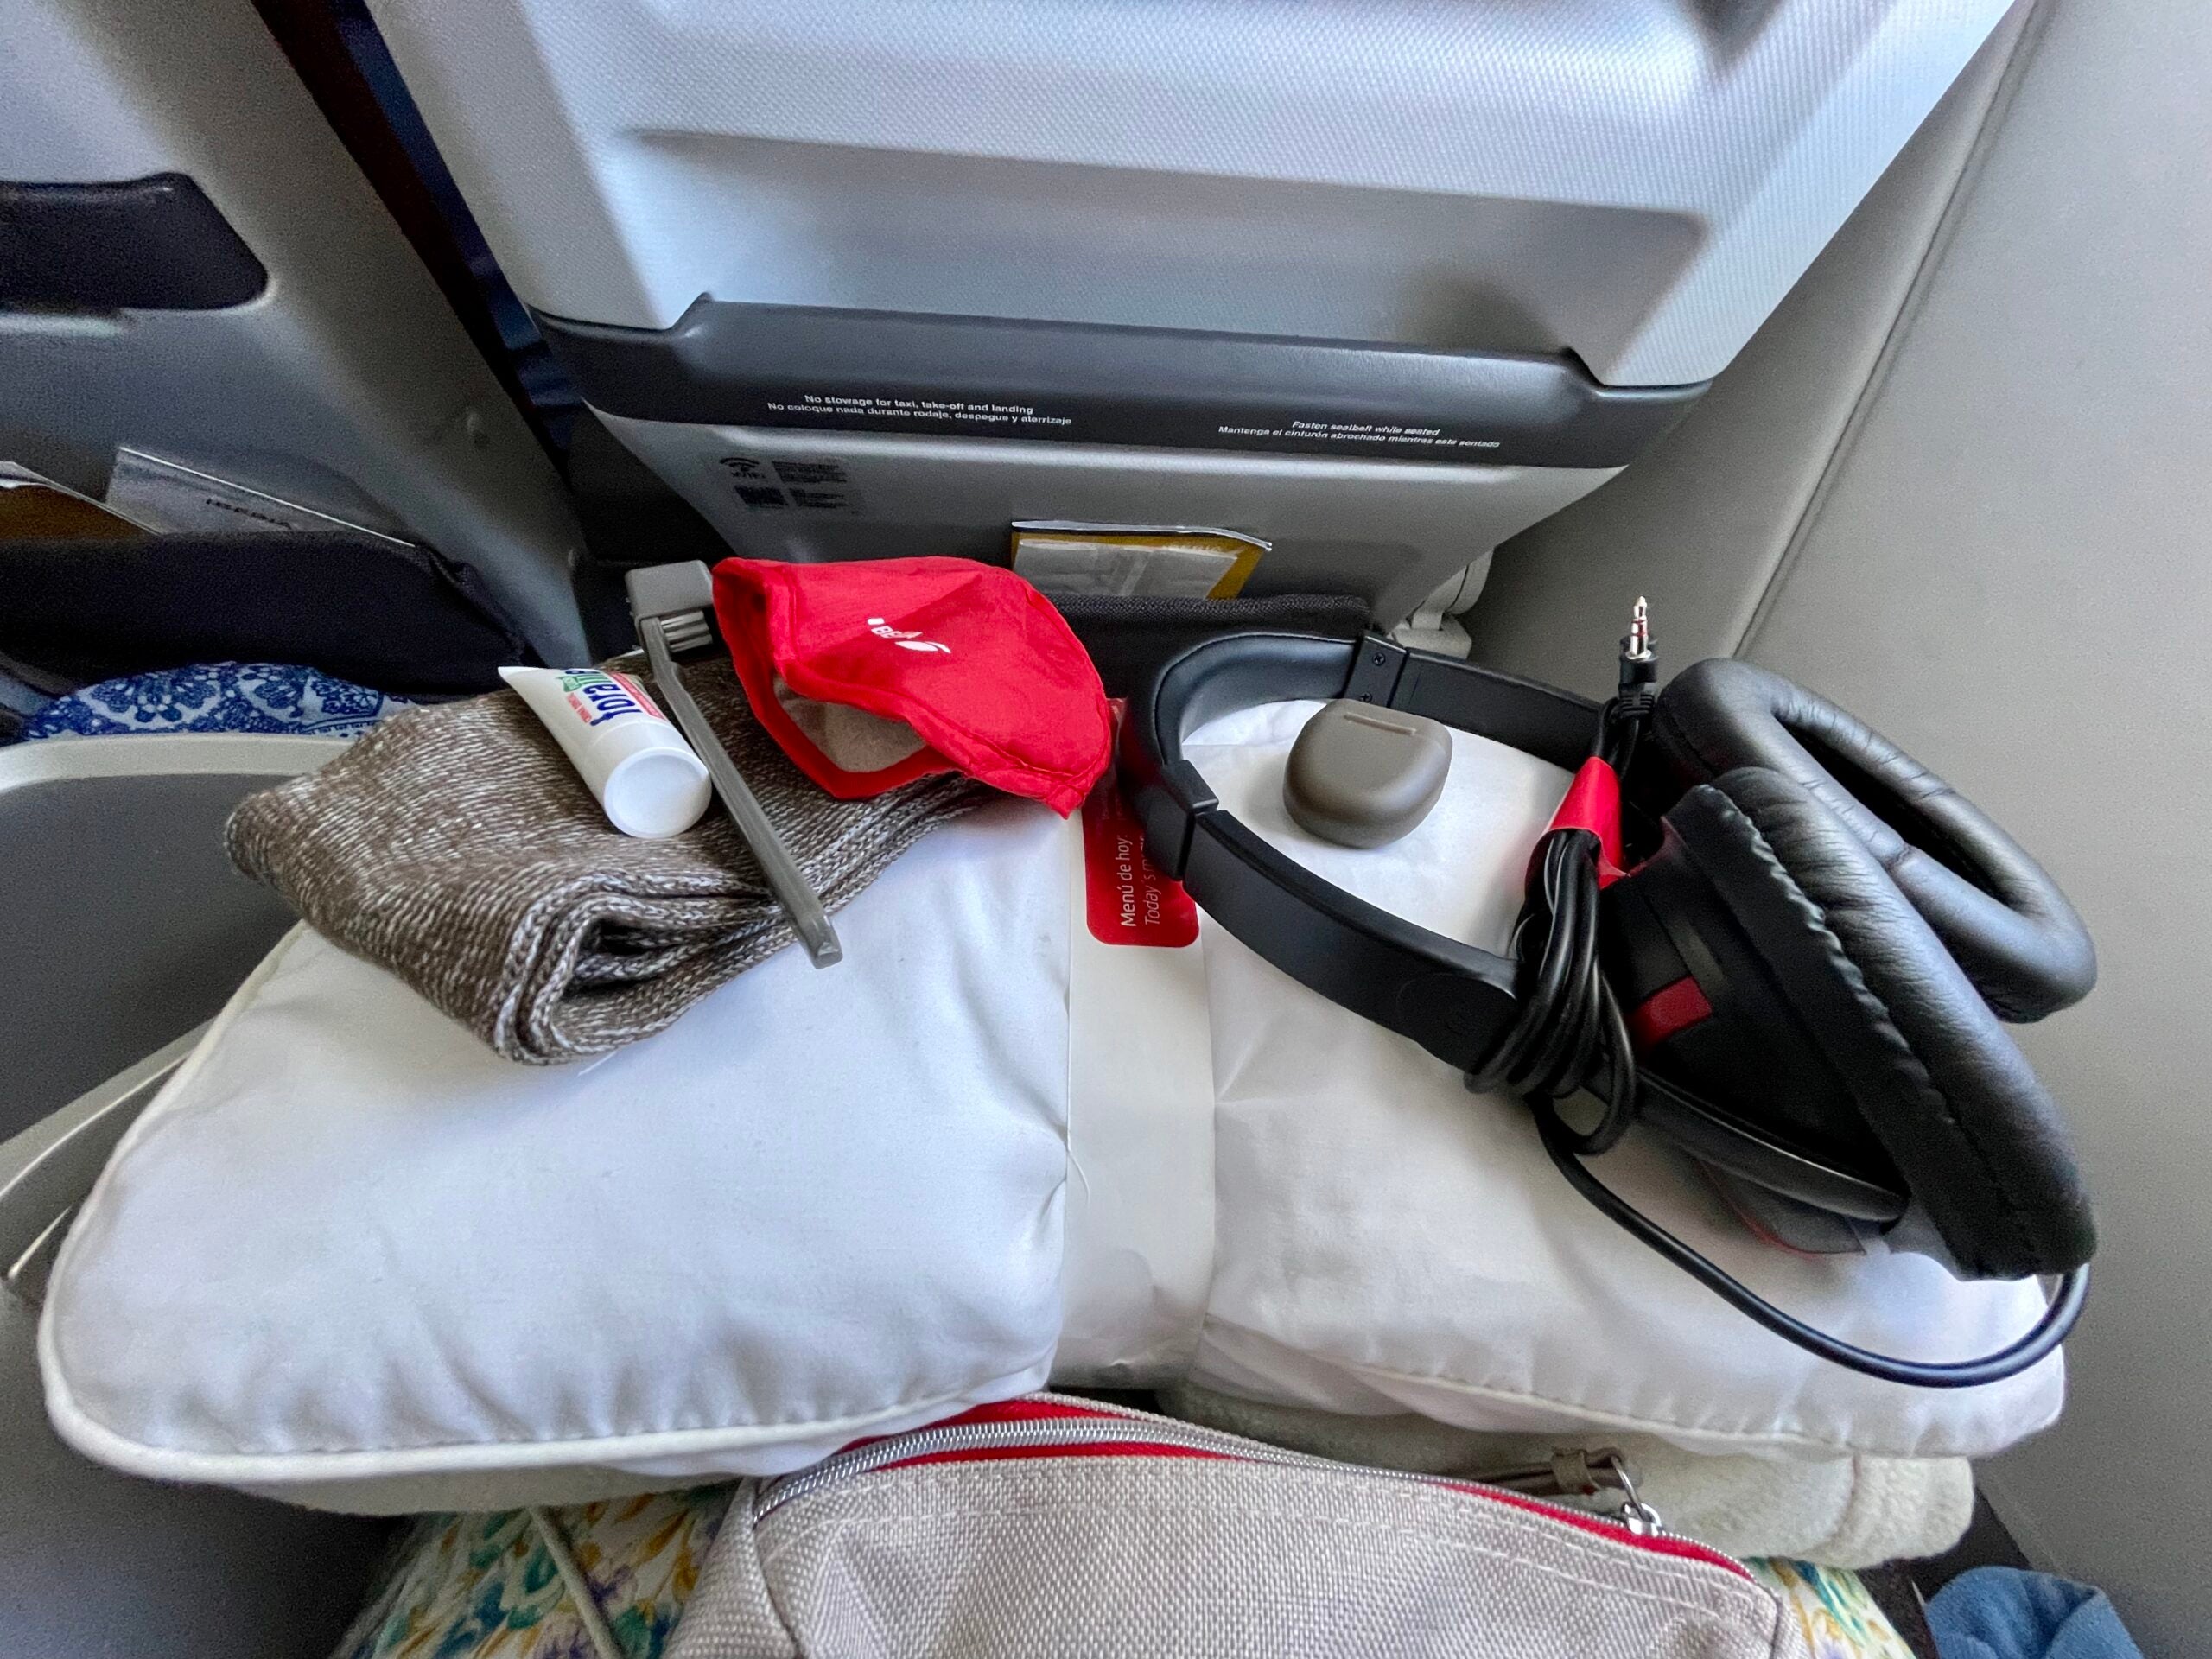 contents of amenity kit